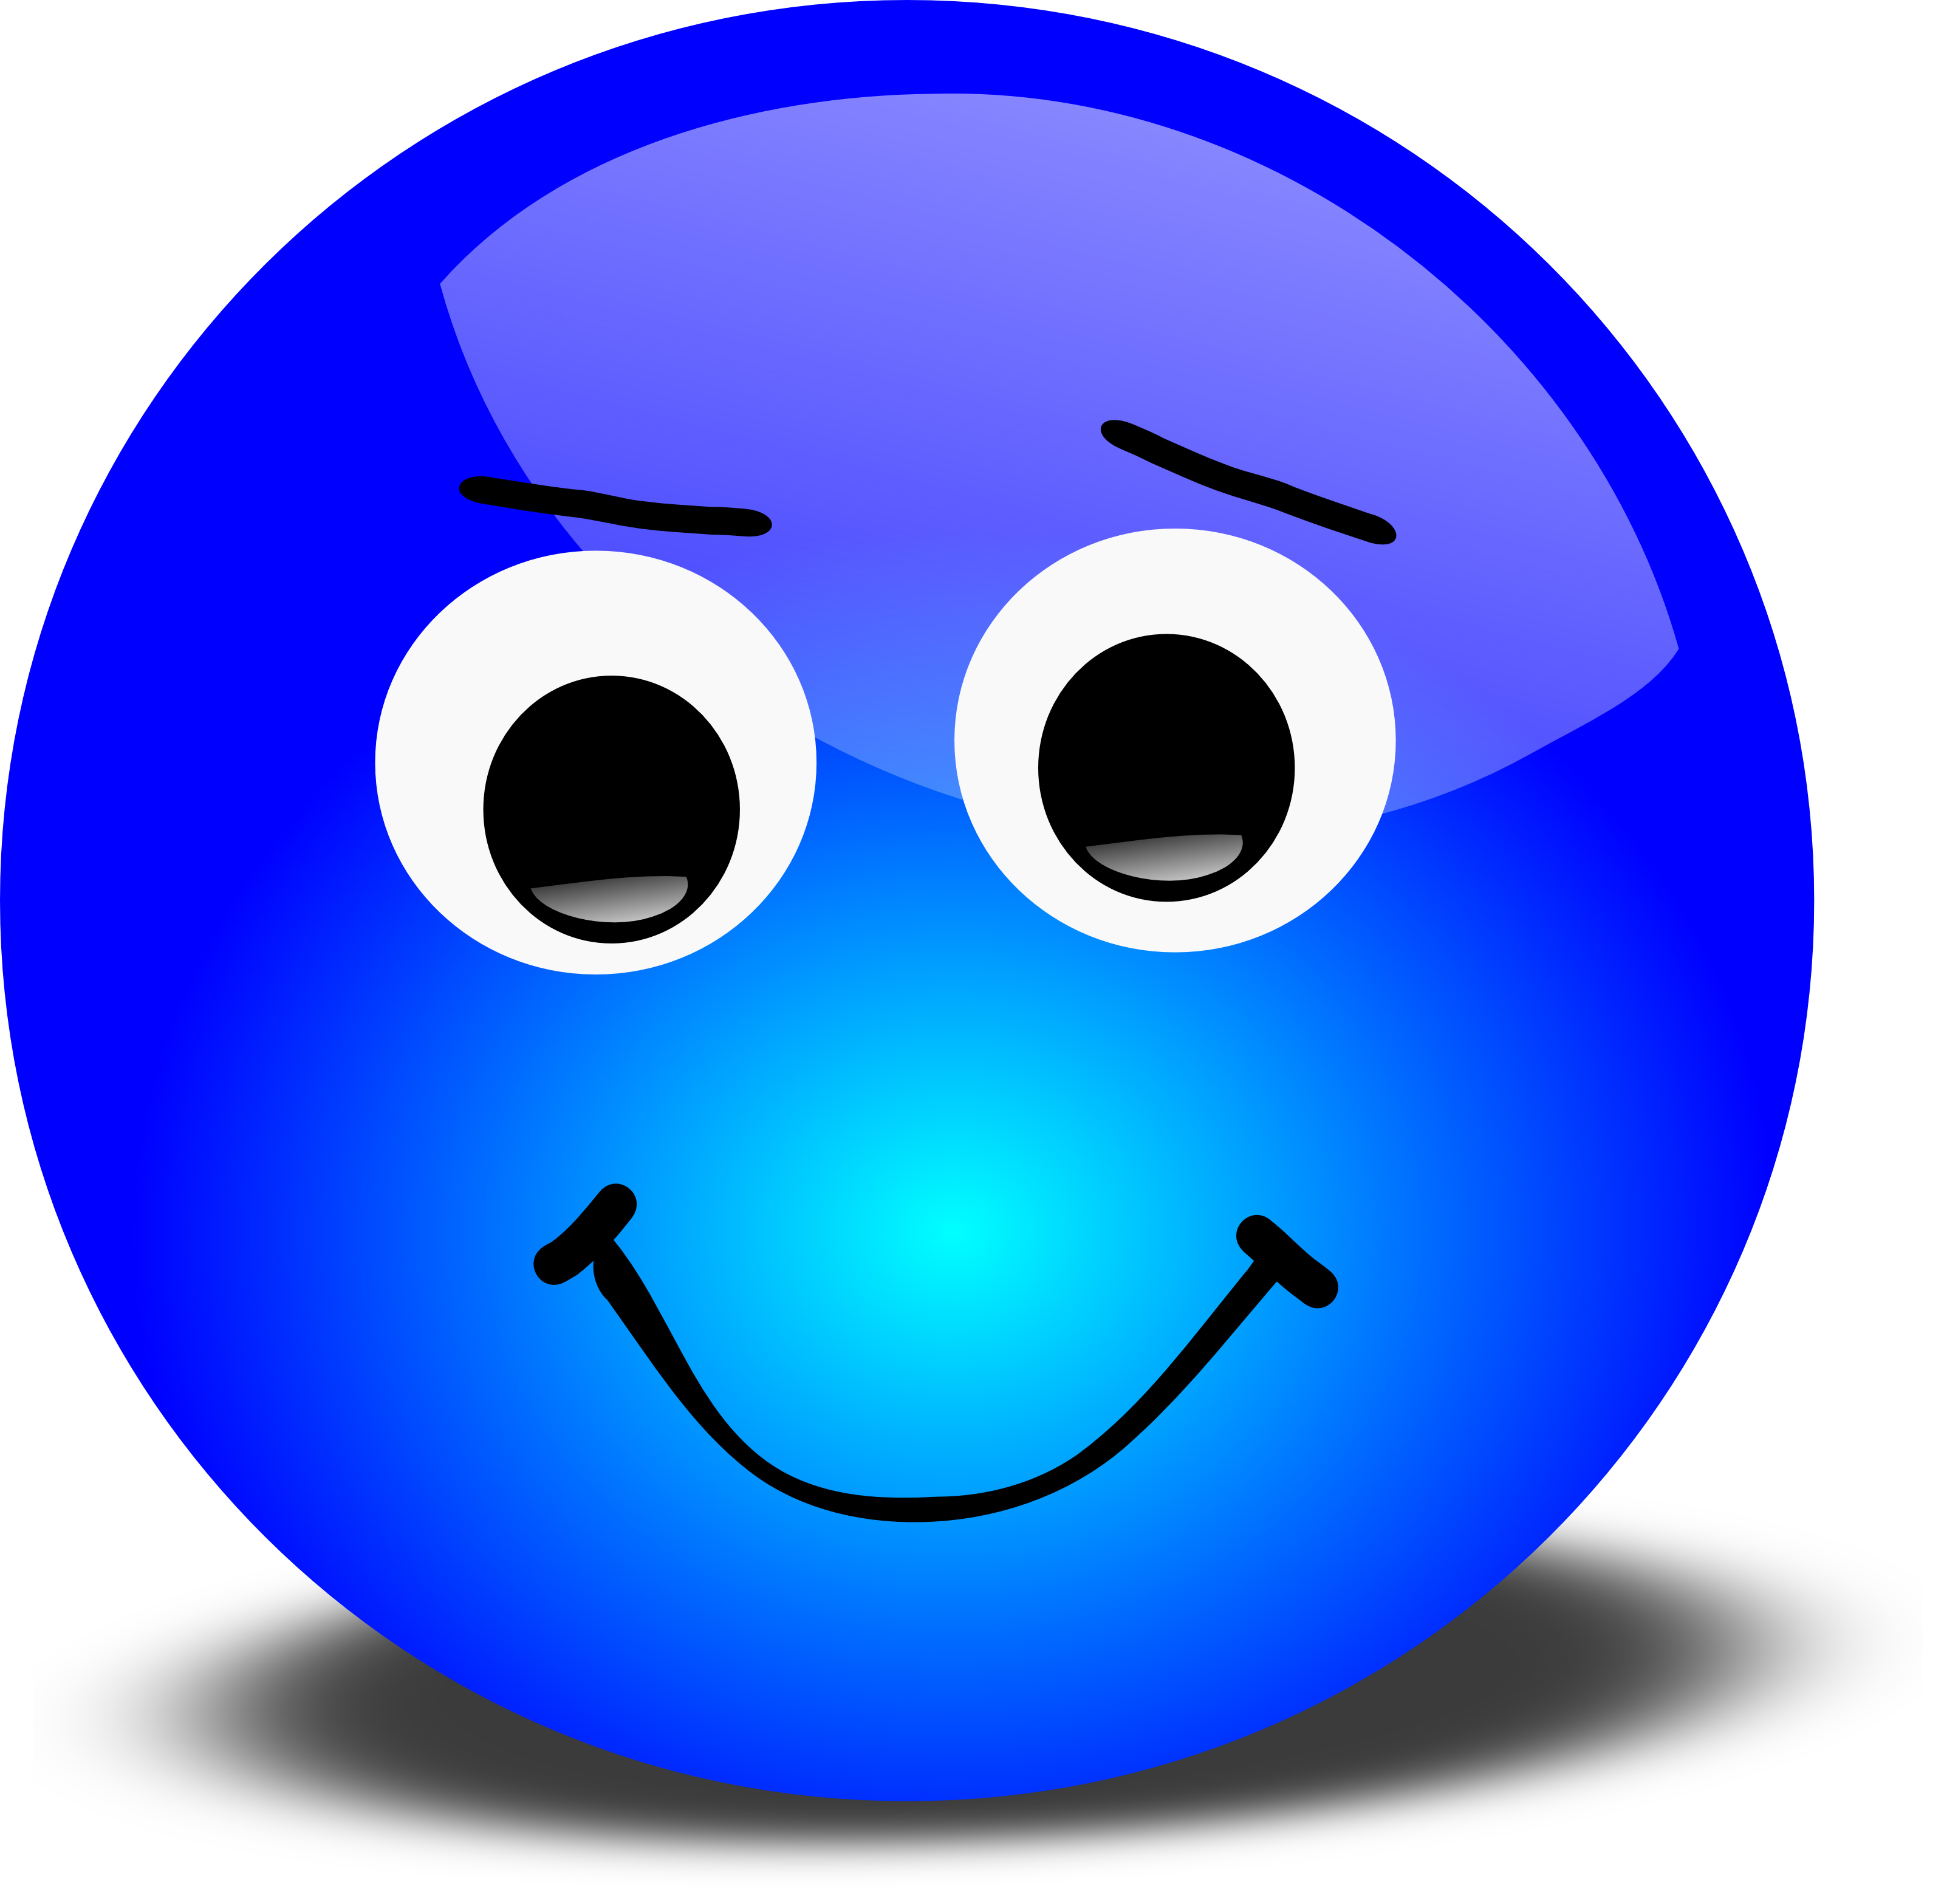 free clipart images happy face - photo #37